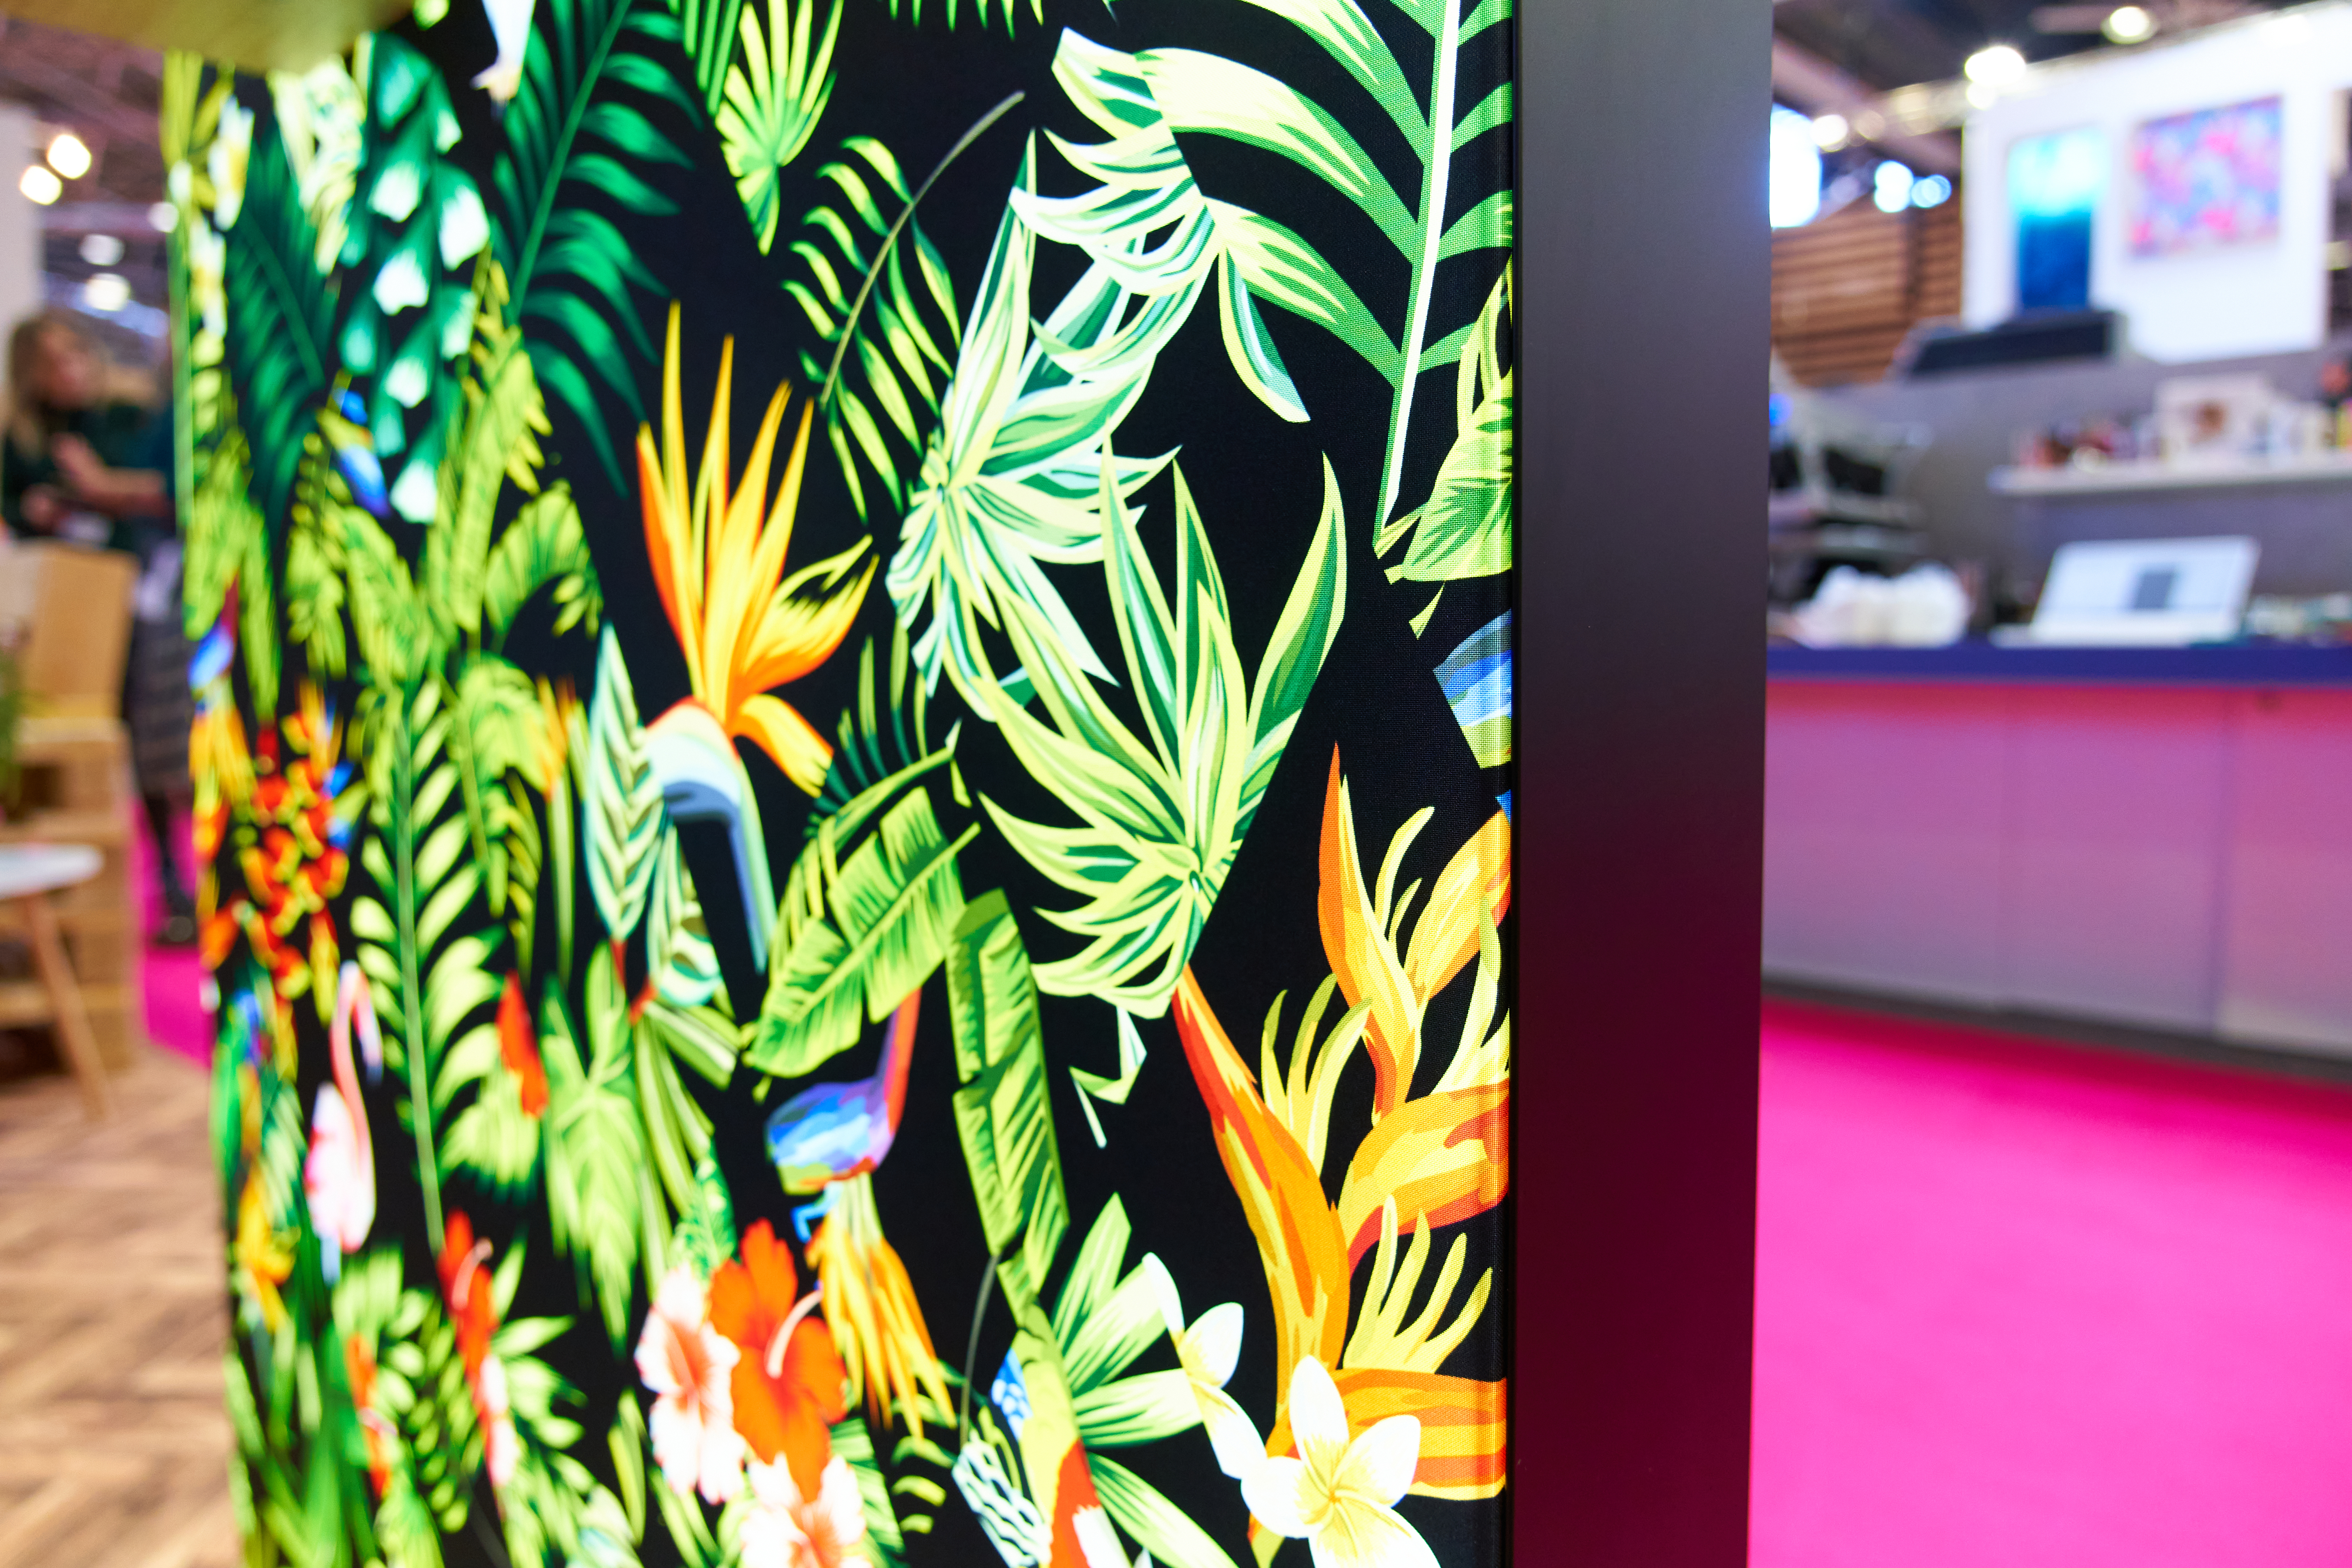 Stand out from the crowd with the new Panoramic Lightbox features!